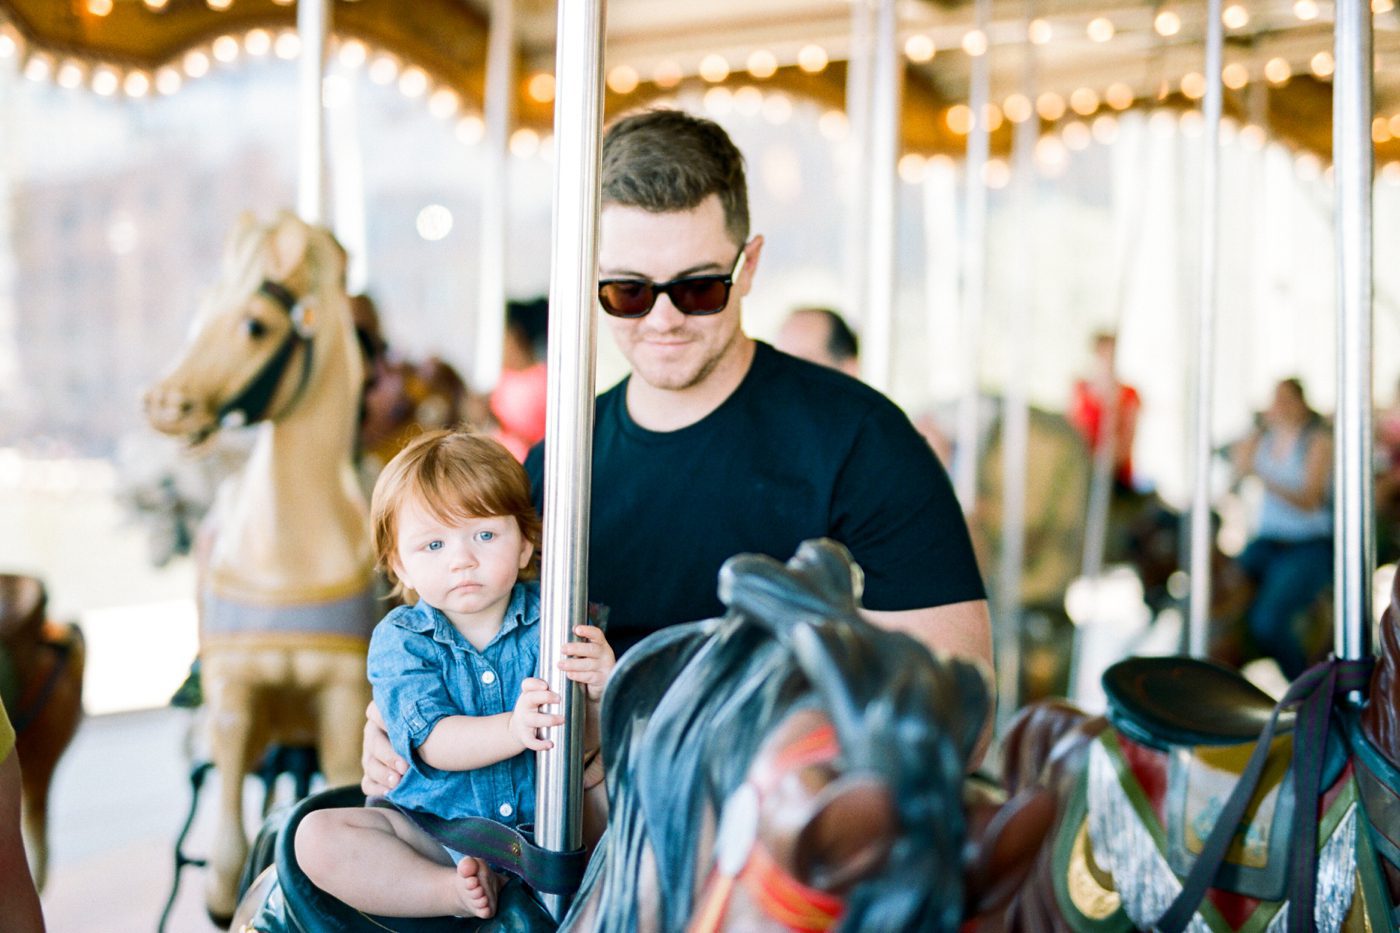 Red headed baby riding an antique carousel in NY